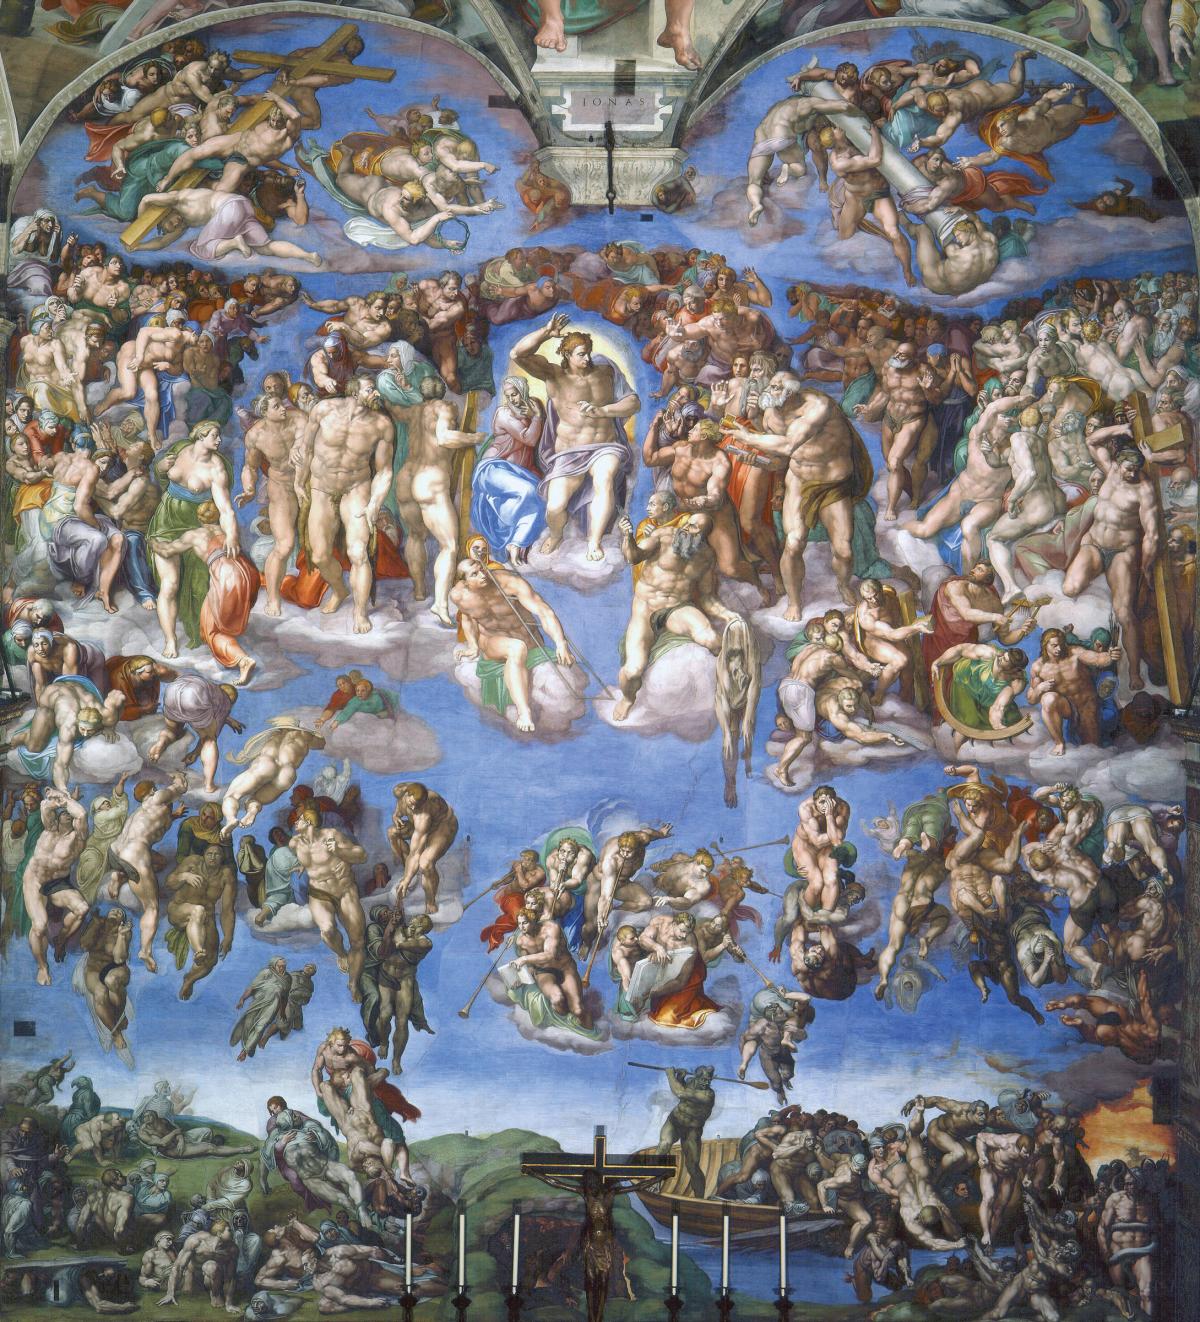 Michelangelo's painting The Last Judgment